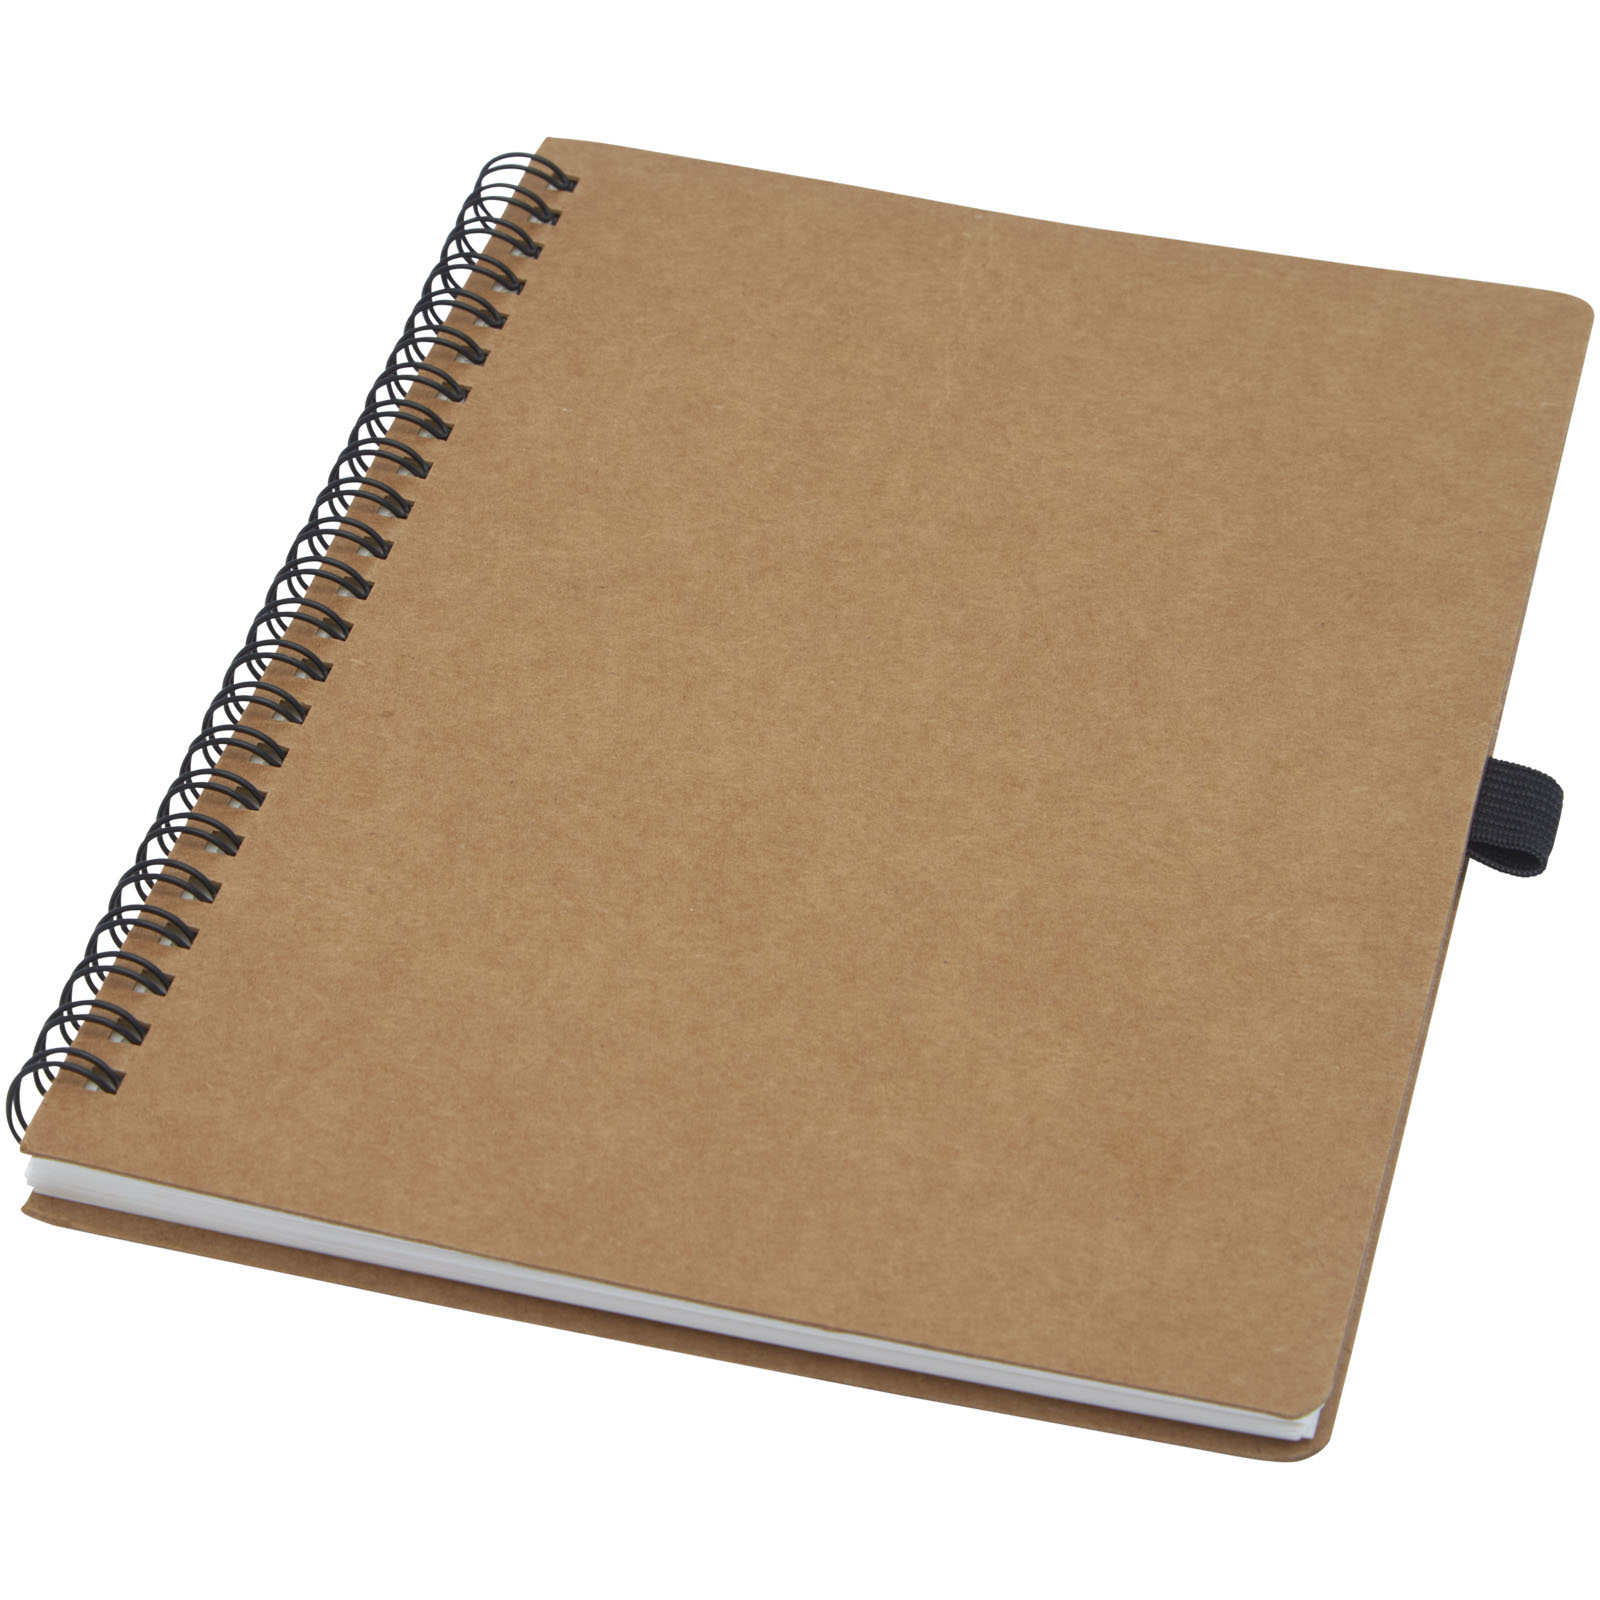 Advertising Notebooks - Cobble A5 wire-o recycled cardboard notebook with stone paper